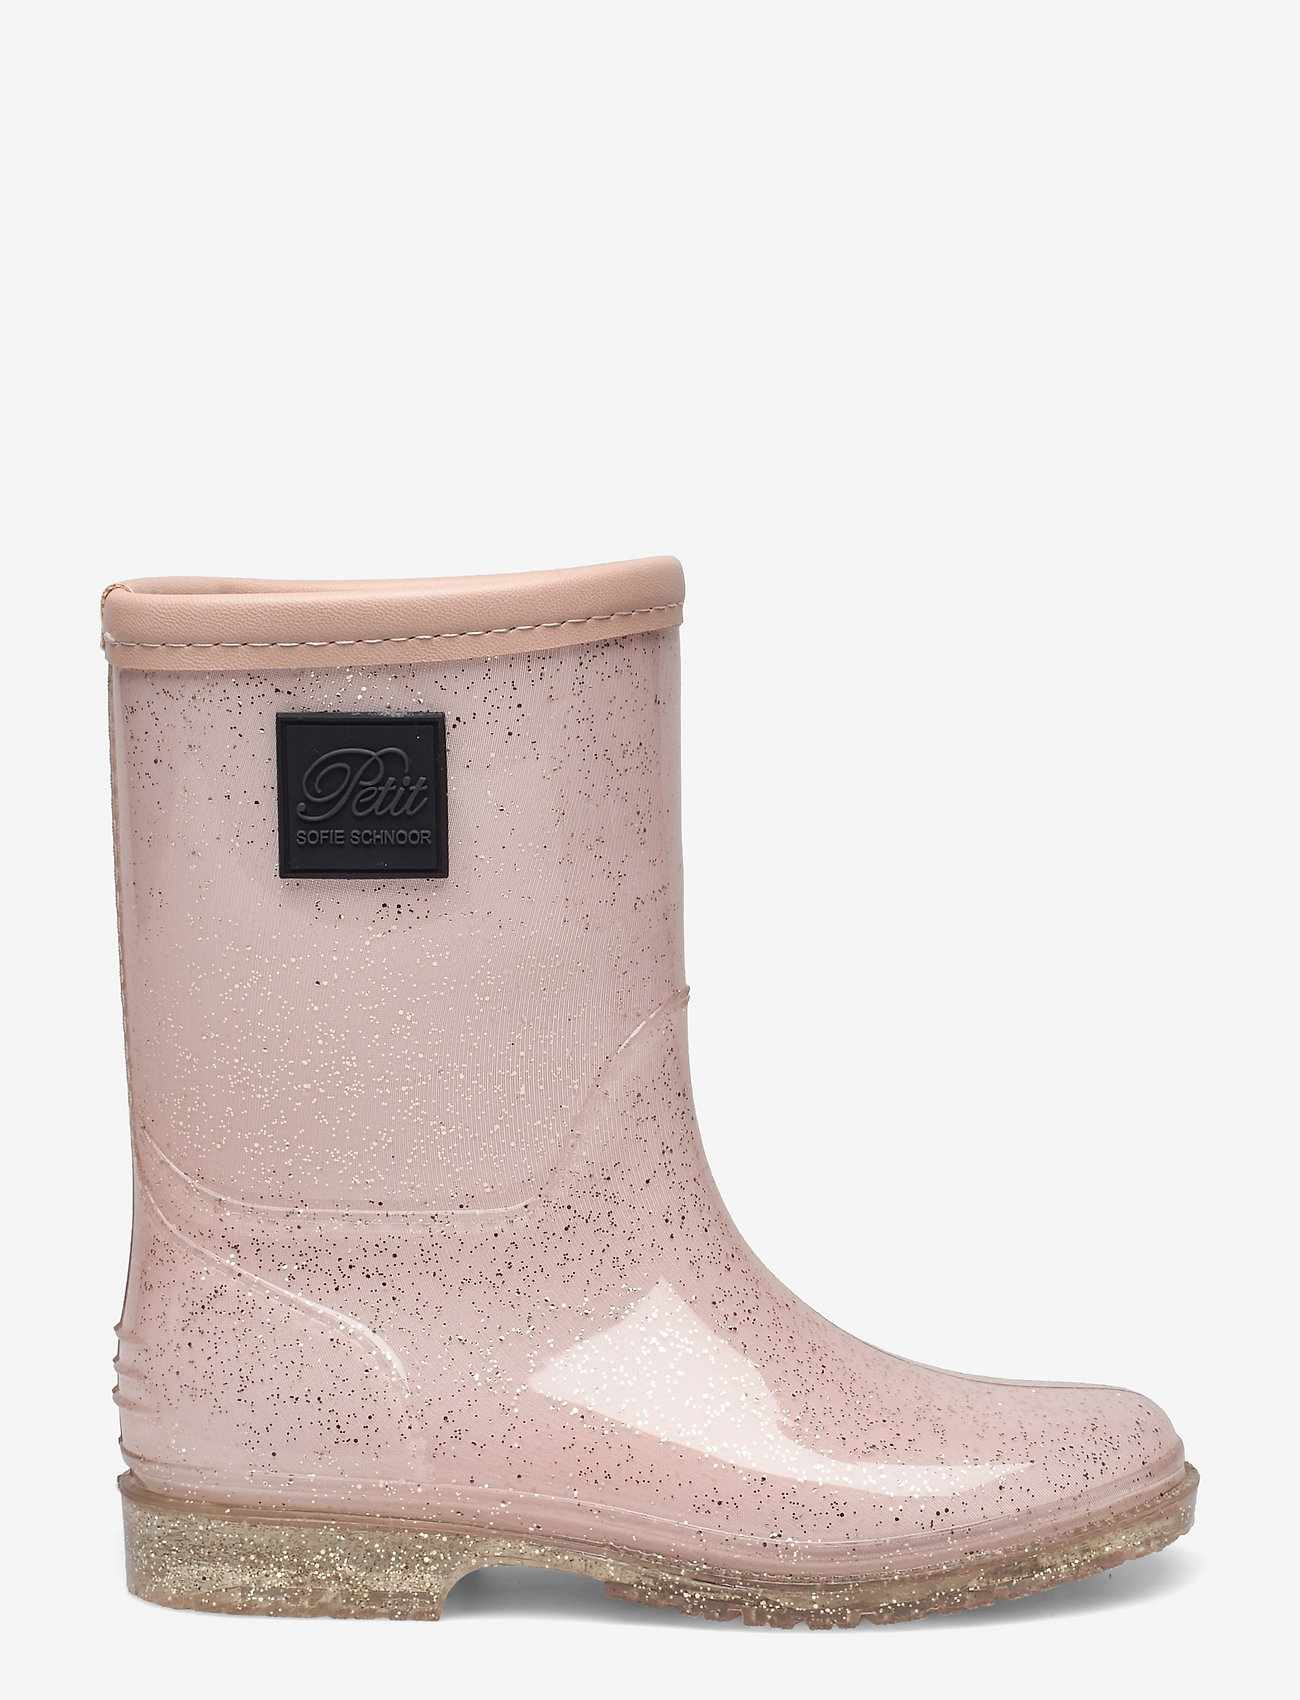 Sofie Schnoor Baby and Kids - Rubber boot - laveste priser - light rose - 1